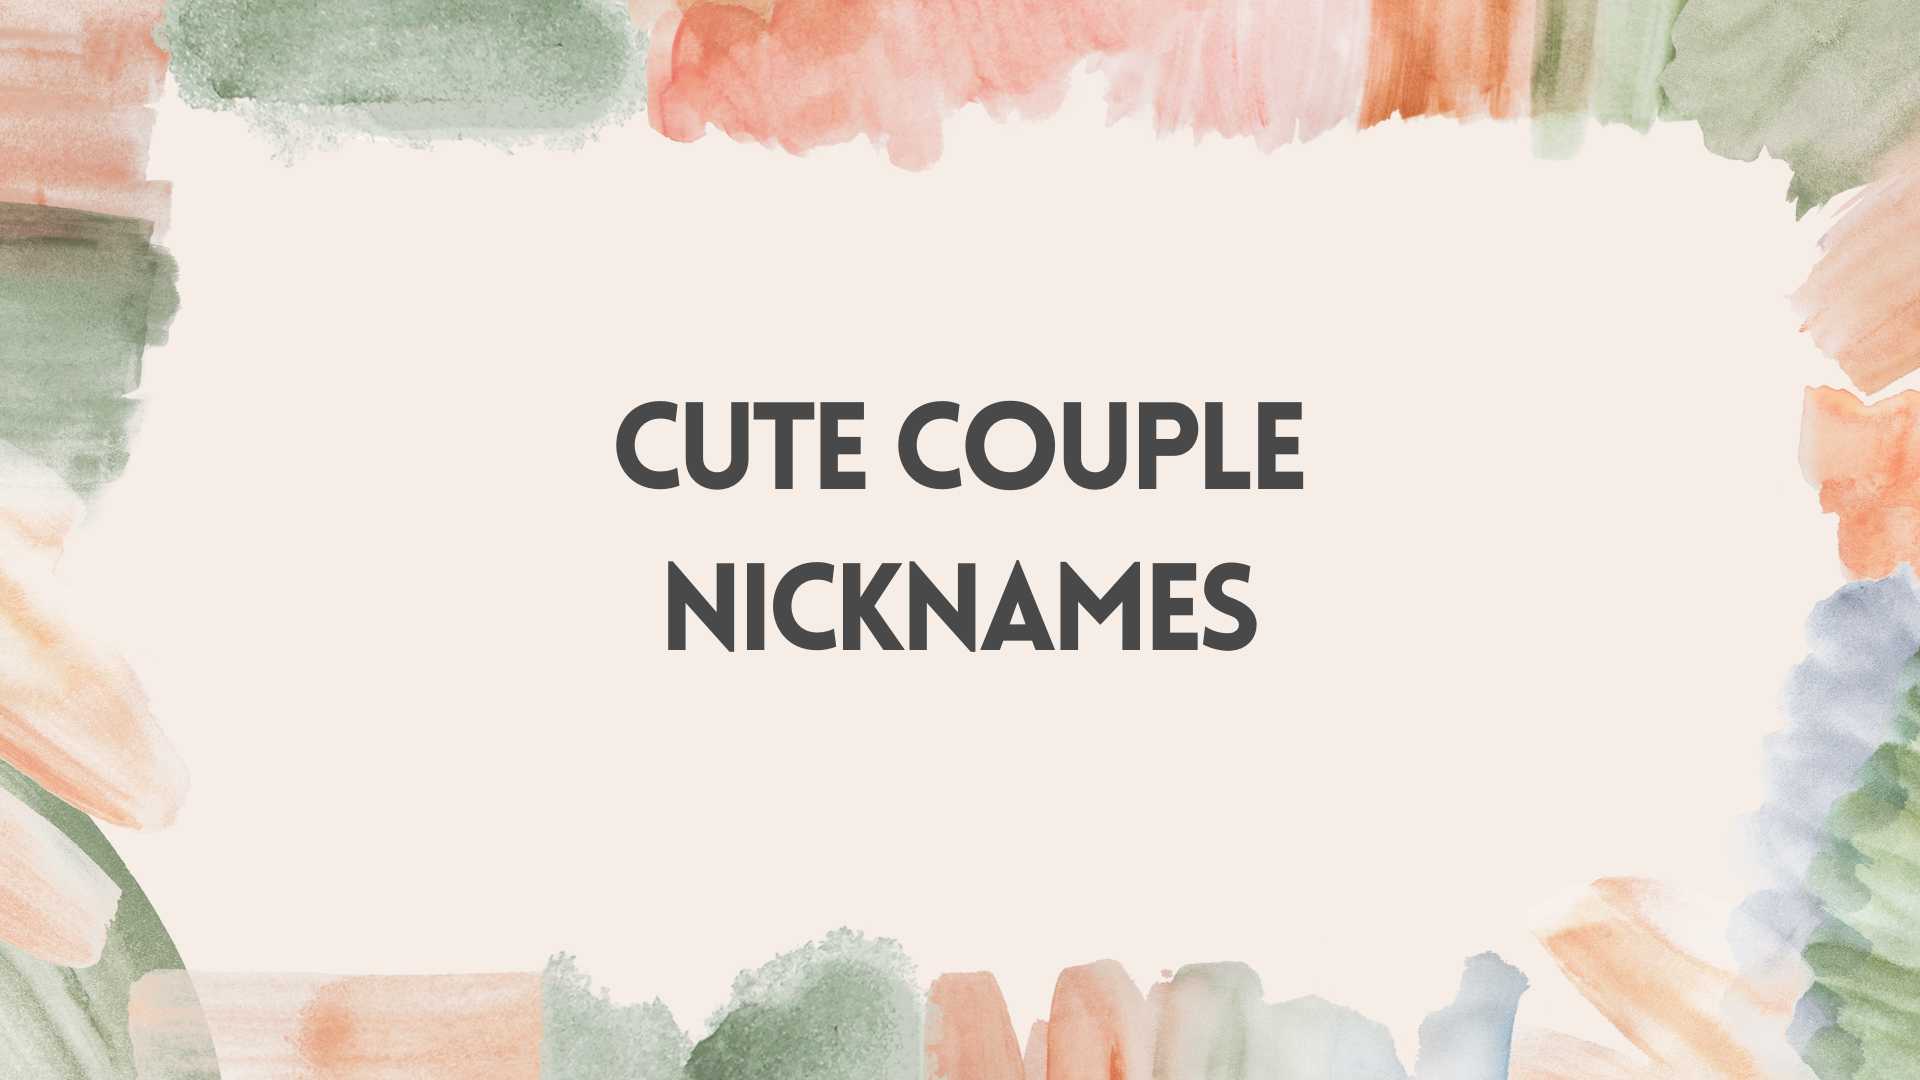 300+ Cute Couple Nicknames To Consider